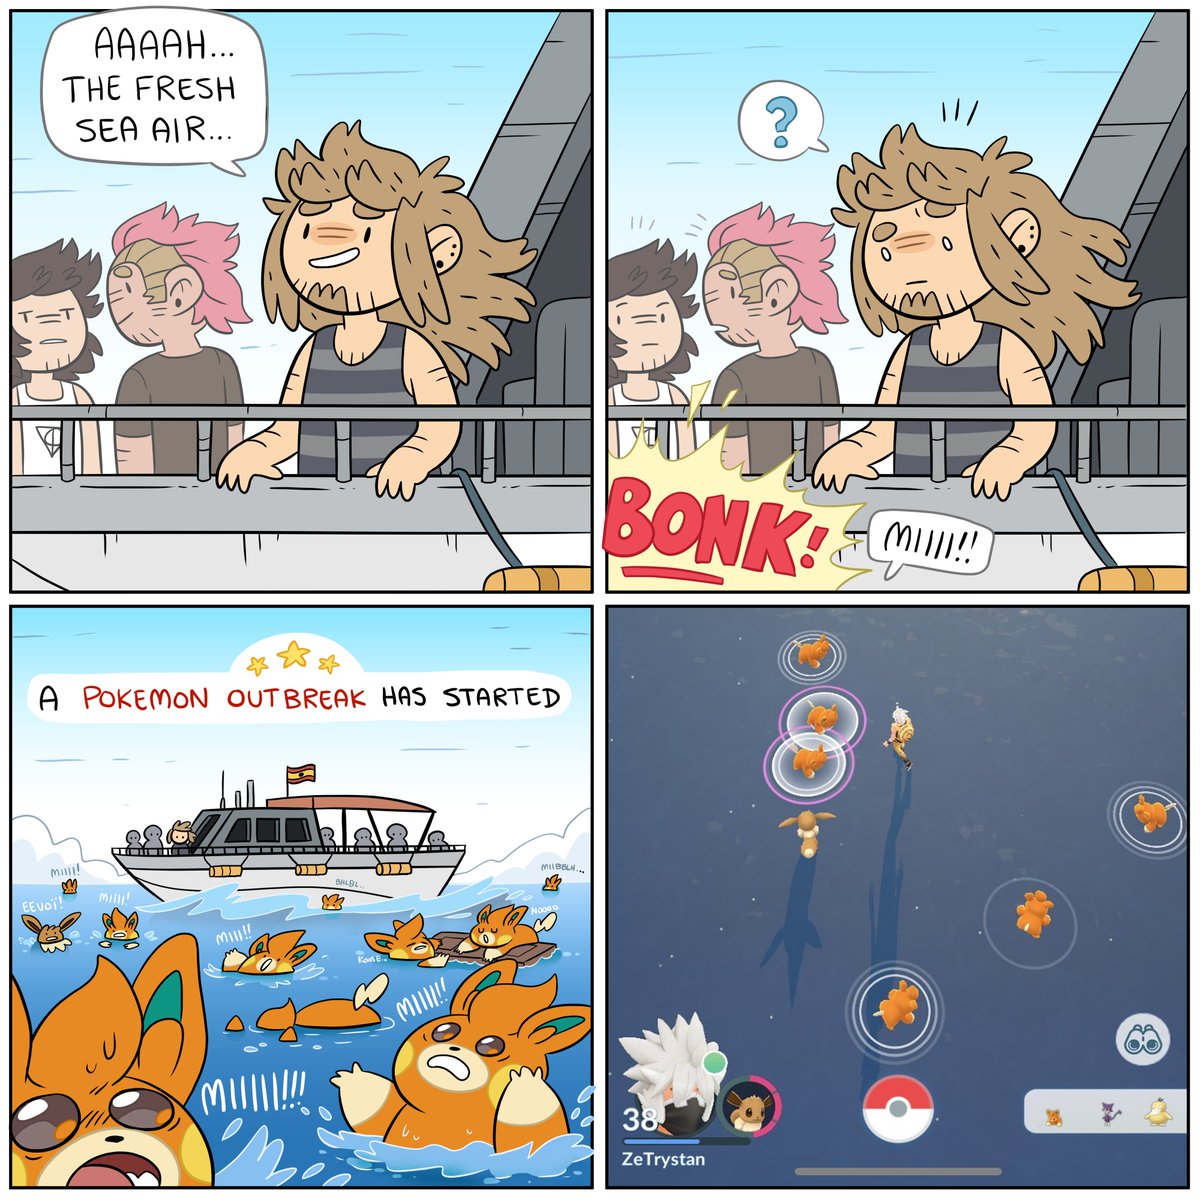 That one time I played Pokemon Go when I was on a boat. 